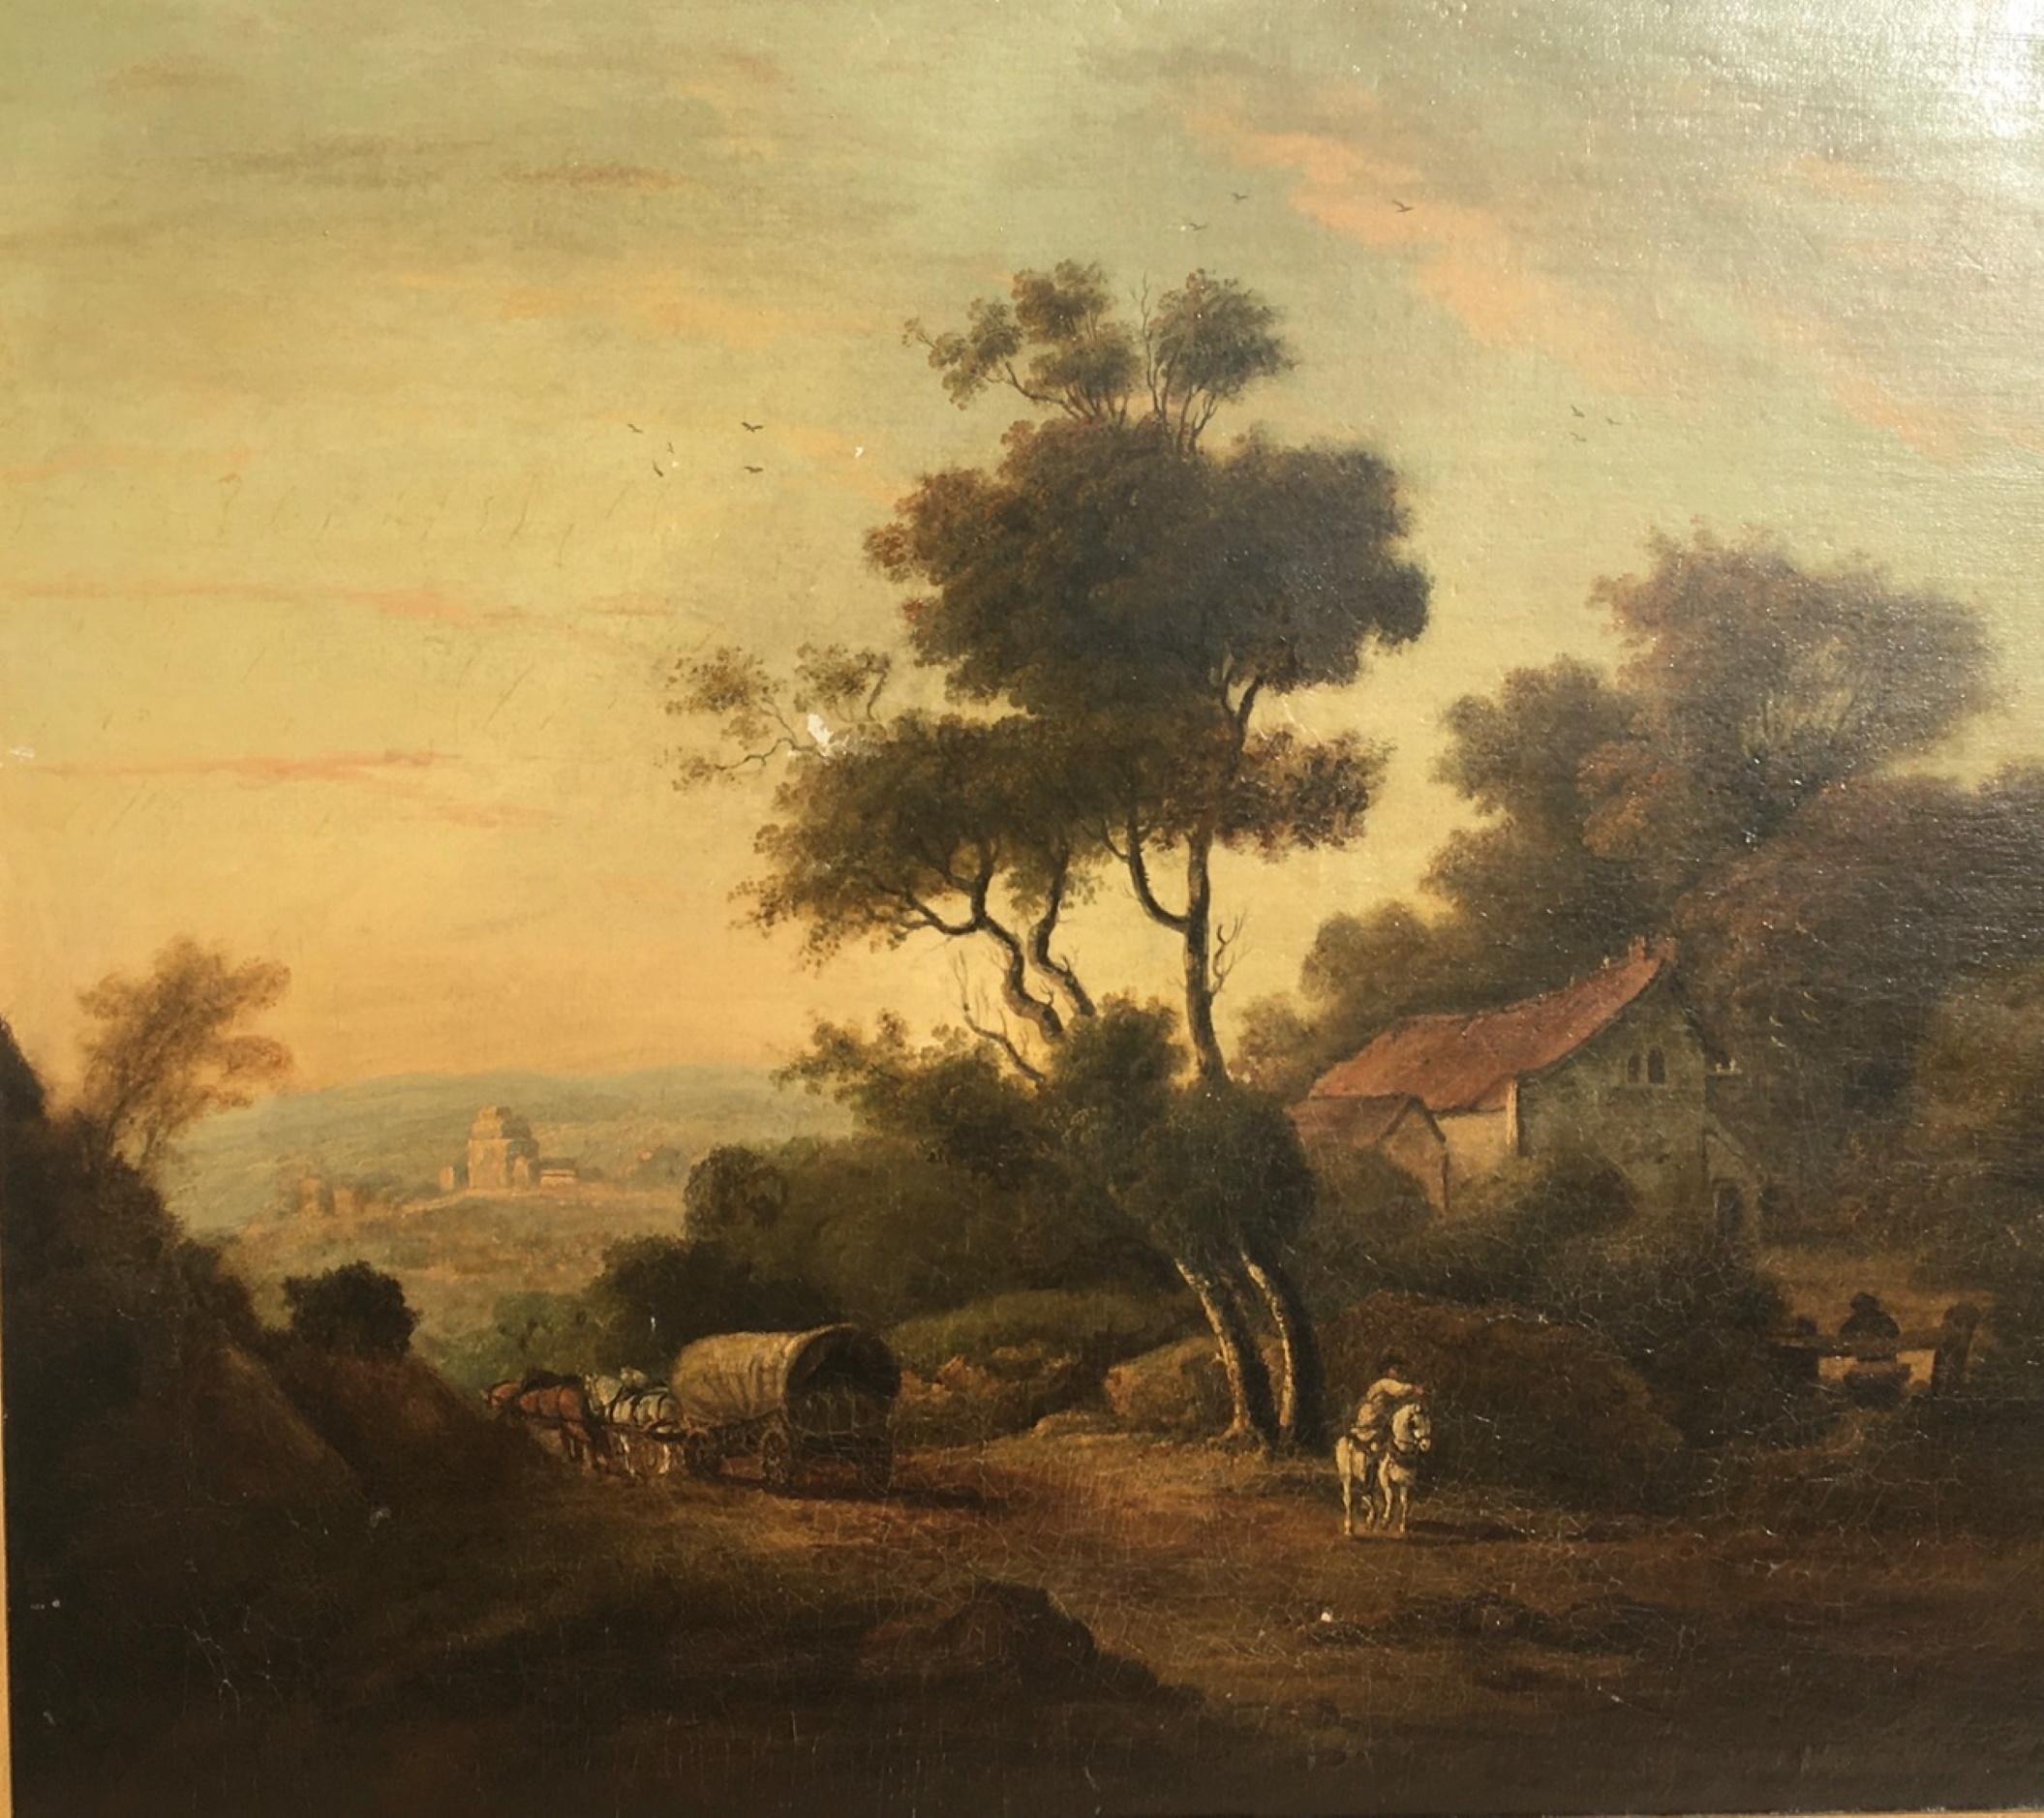 Julius Caesar Ibbetson 1759-1817 old master painting English, 18th century

This English school painting by Julius Caesar Ibbetson (1759-1817) depicts a countryside farm house off of a road with a horse drawn wagon and set in a mountain landscape.